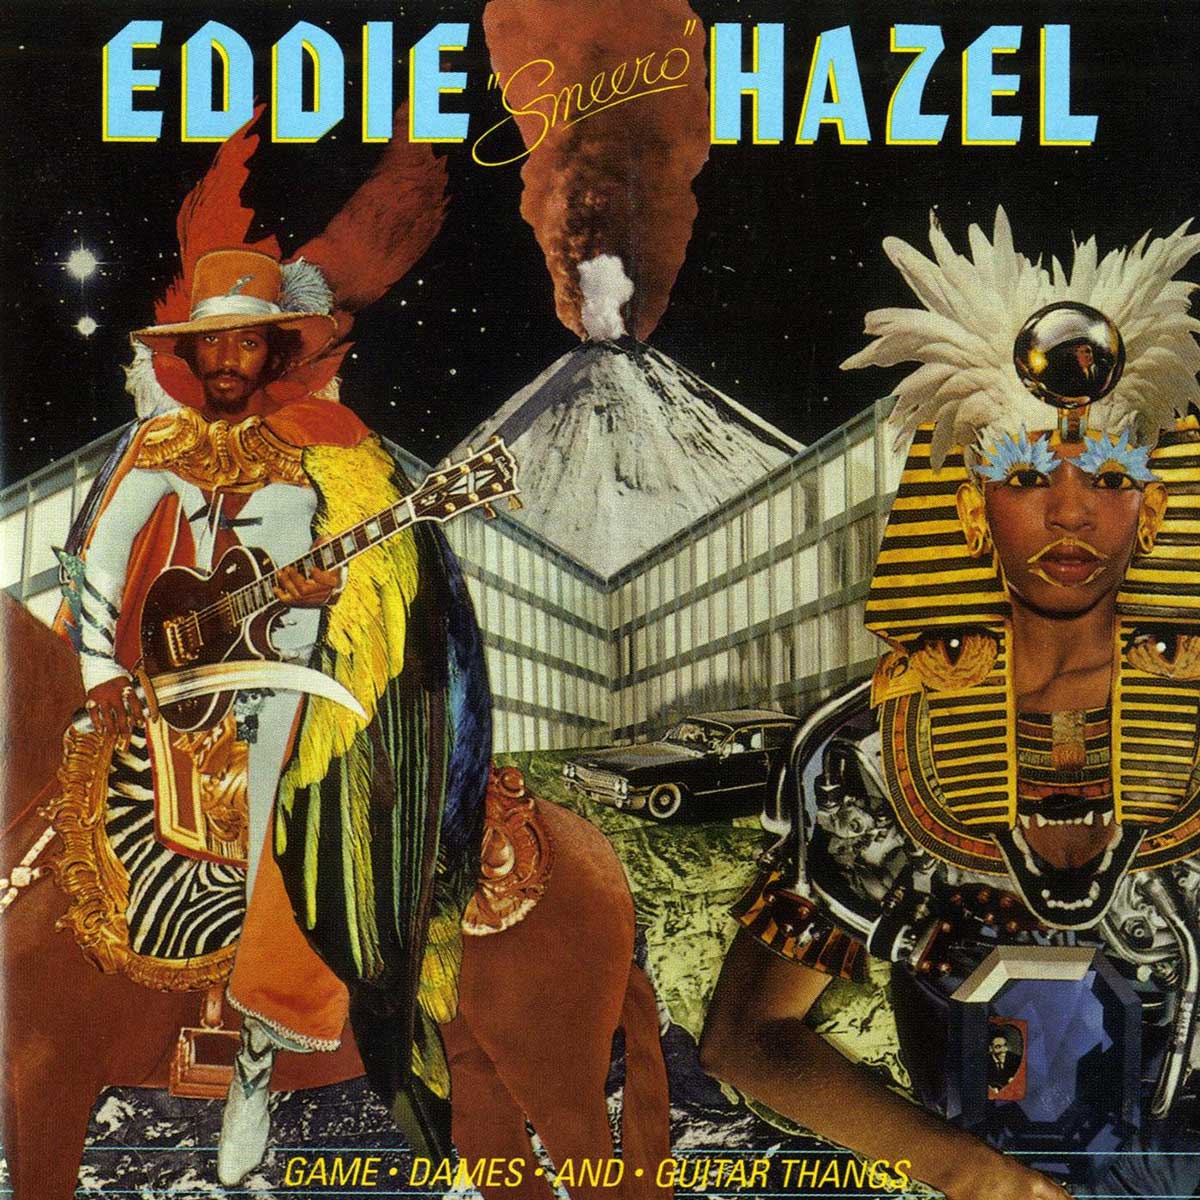 Photo of Eddie Hazel's "Smeero" vinyl sleeve album cover. The cover is a collage of different things set against a dark black starry sky. Eddie Hazel himself is dressed in a cowboy hat, a black cape and other eccentric clothes while holding a black guitar and staring gout at the viewer. A large snow-covered mountain is centered in the background and appears to be exploding white and orange colored ash. On the righthand side of the cover, there is a man dressed as a pharaoh with electronic body parts and a feathery bejeweled head dress.